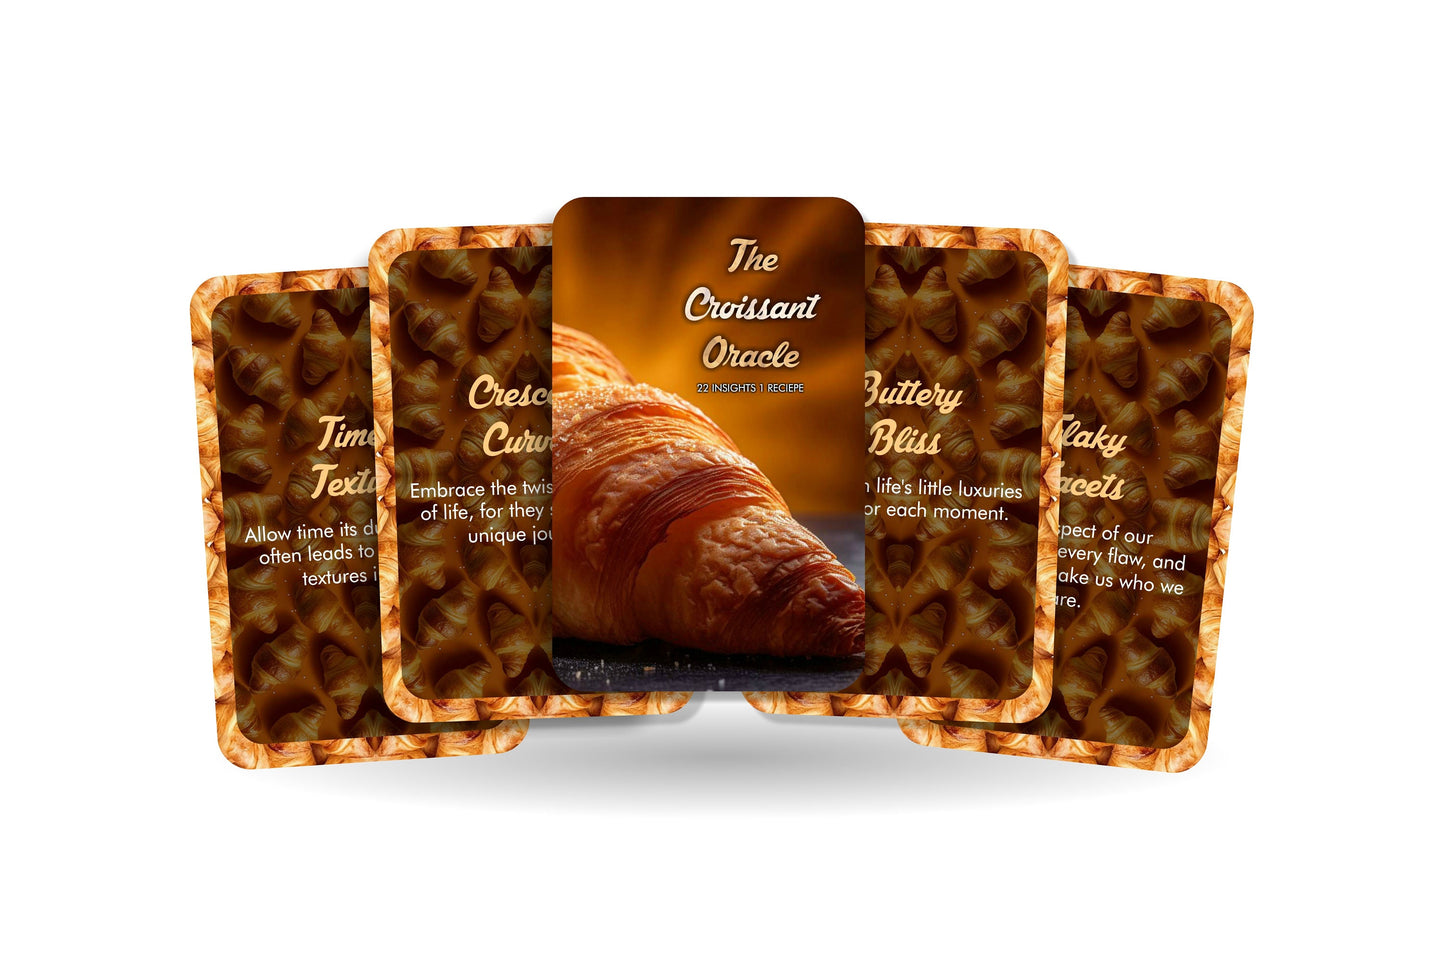 The Croissant Oracle - Twenty Two insights and One recipe